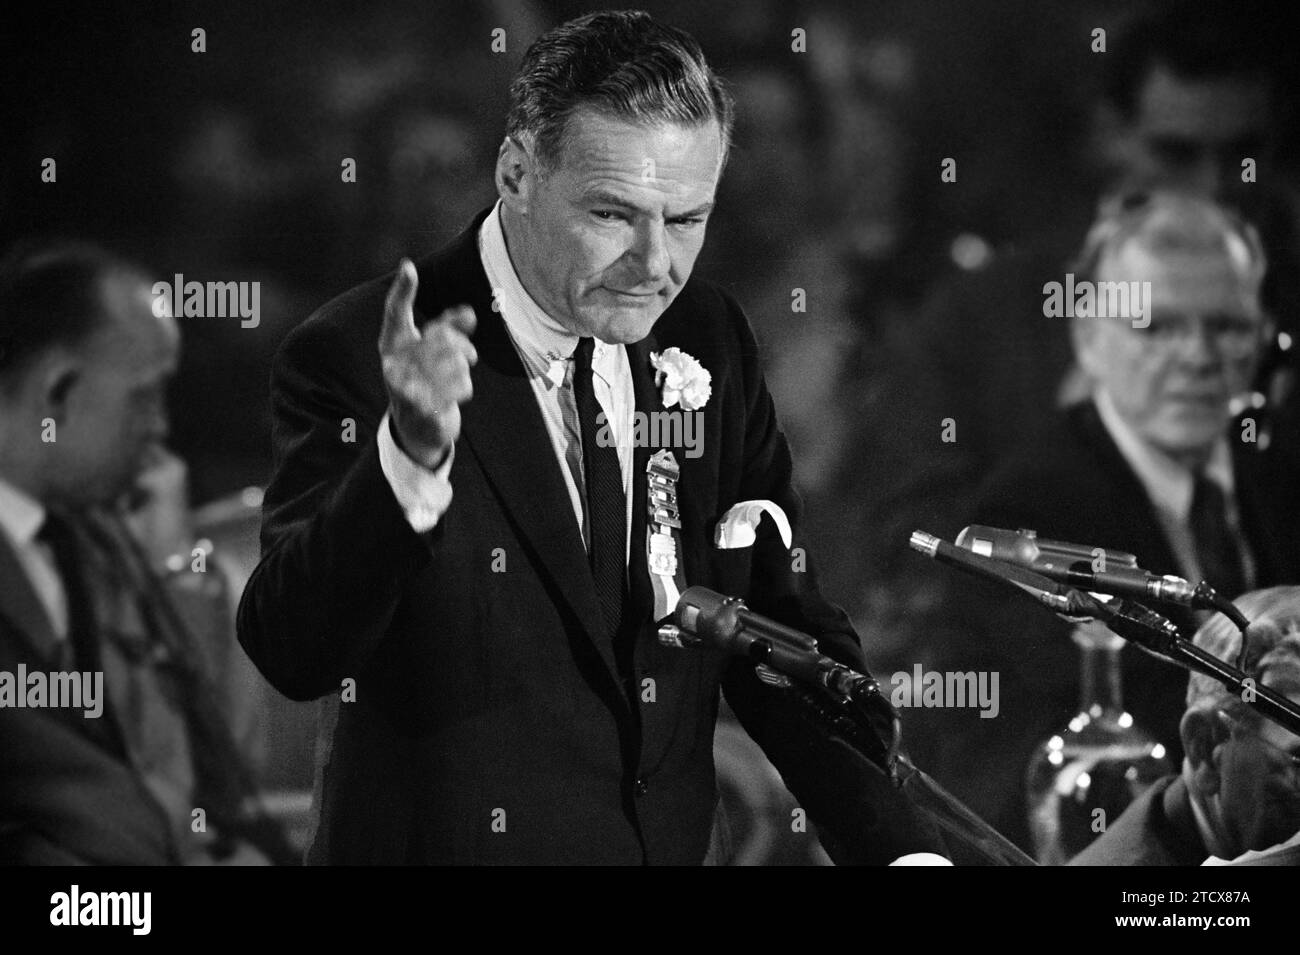 U.S. Vice presidential nominee Ambassador Henry Cabot Lodge, Jr., giving his acceptance speech at rostrum during Republican National Convention, Chicago, Illinois, USA, Thomas J. O'Halloran, U.S. News & World Report Magazine Photograph Collection, July 28, 1960 Stock Photo